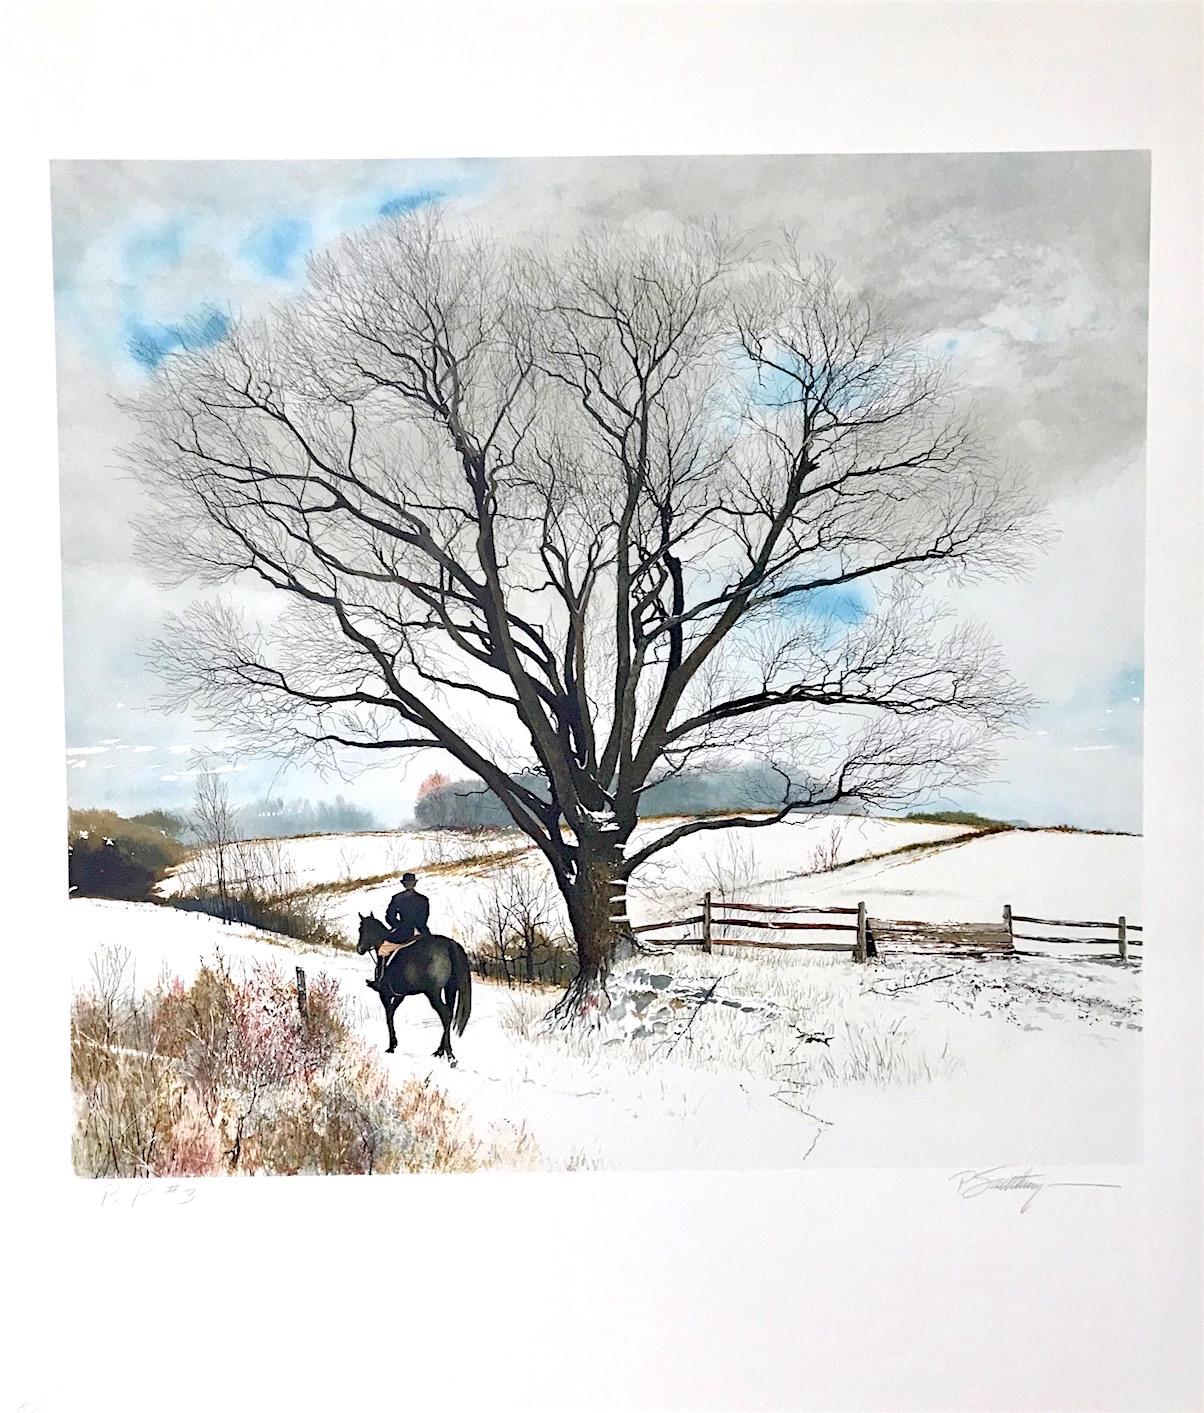 HILLTOPPER Signed Lithograph, Snow Covered Hilltop, Equestrian English Riding - Gray Landscape Print by Peter Sculthorpe